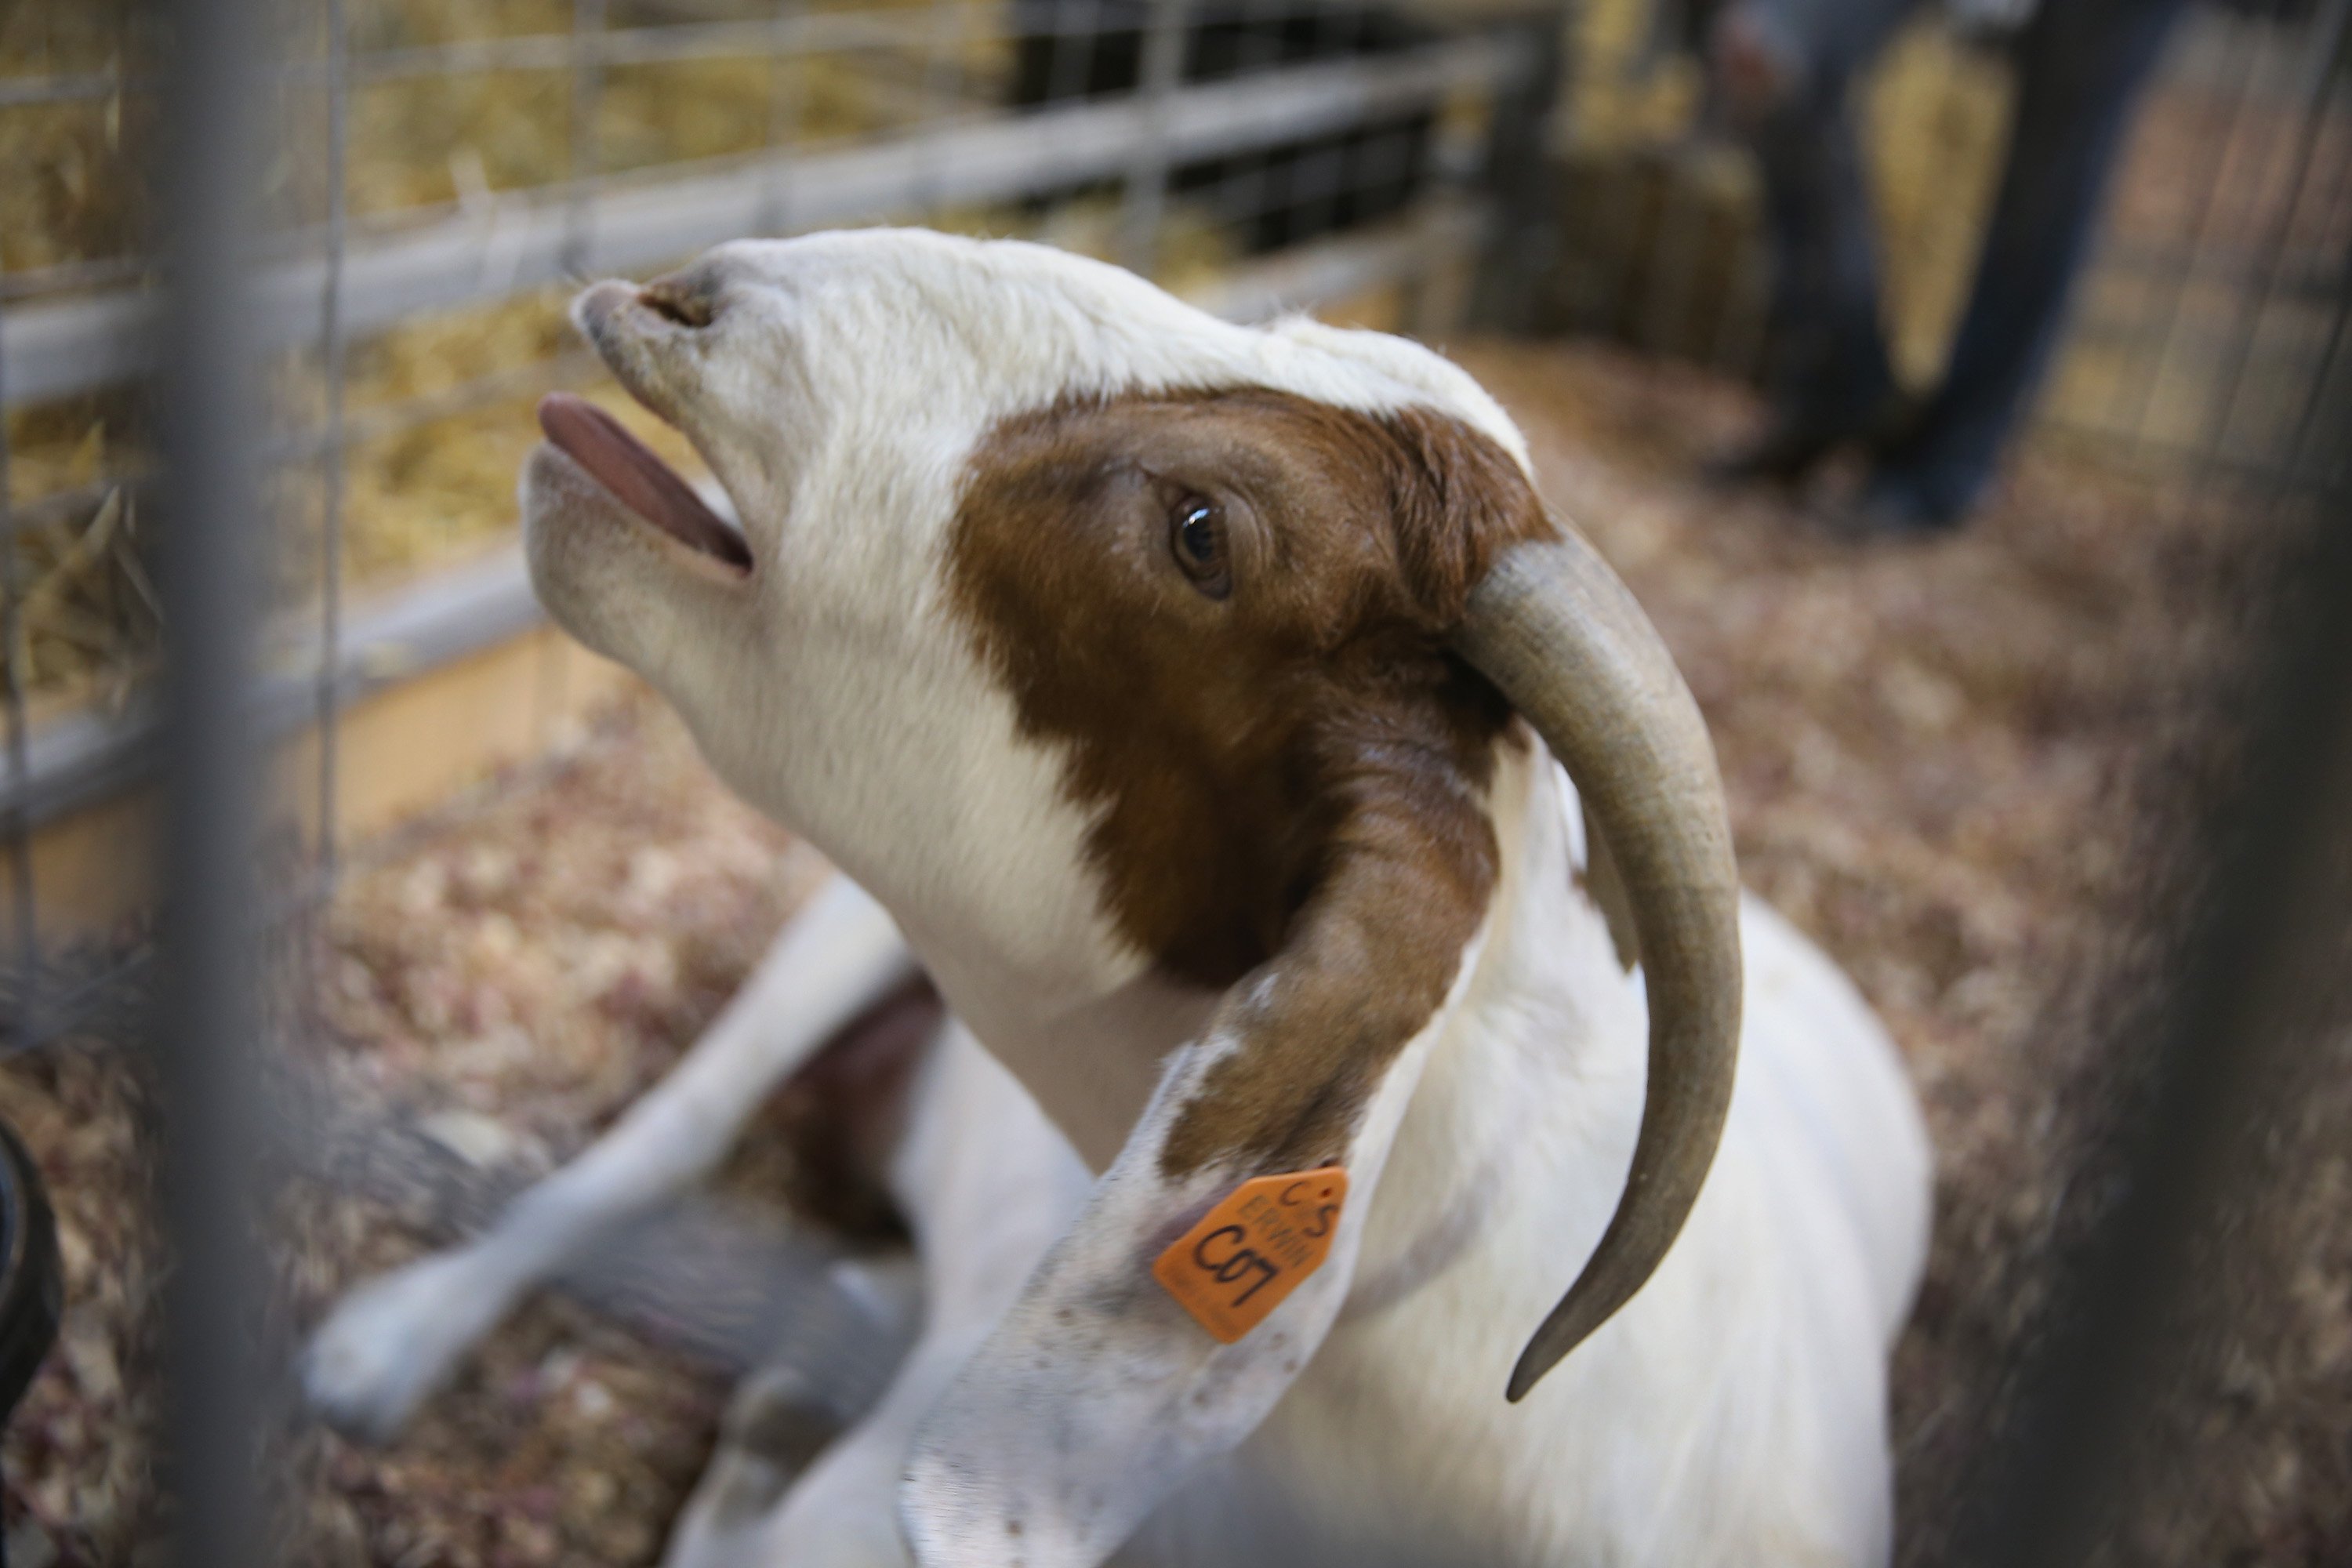 A goat gives birth at the Iowa State Fair on August 6, 2014 in Des Moines, Iowa. (Scott Olson—Getty Images)